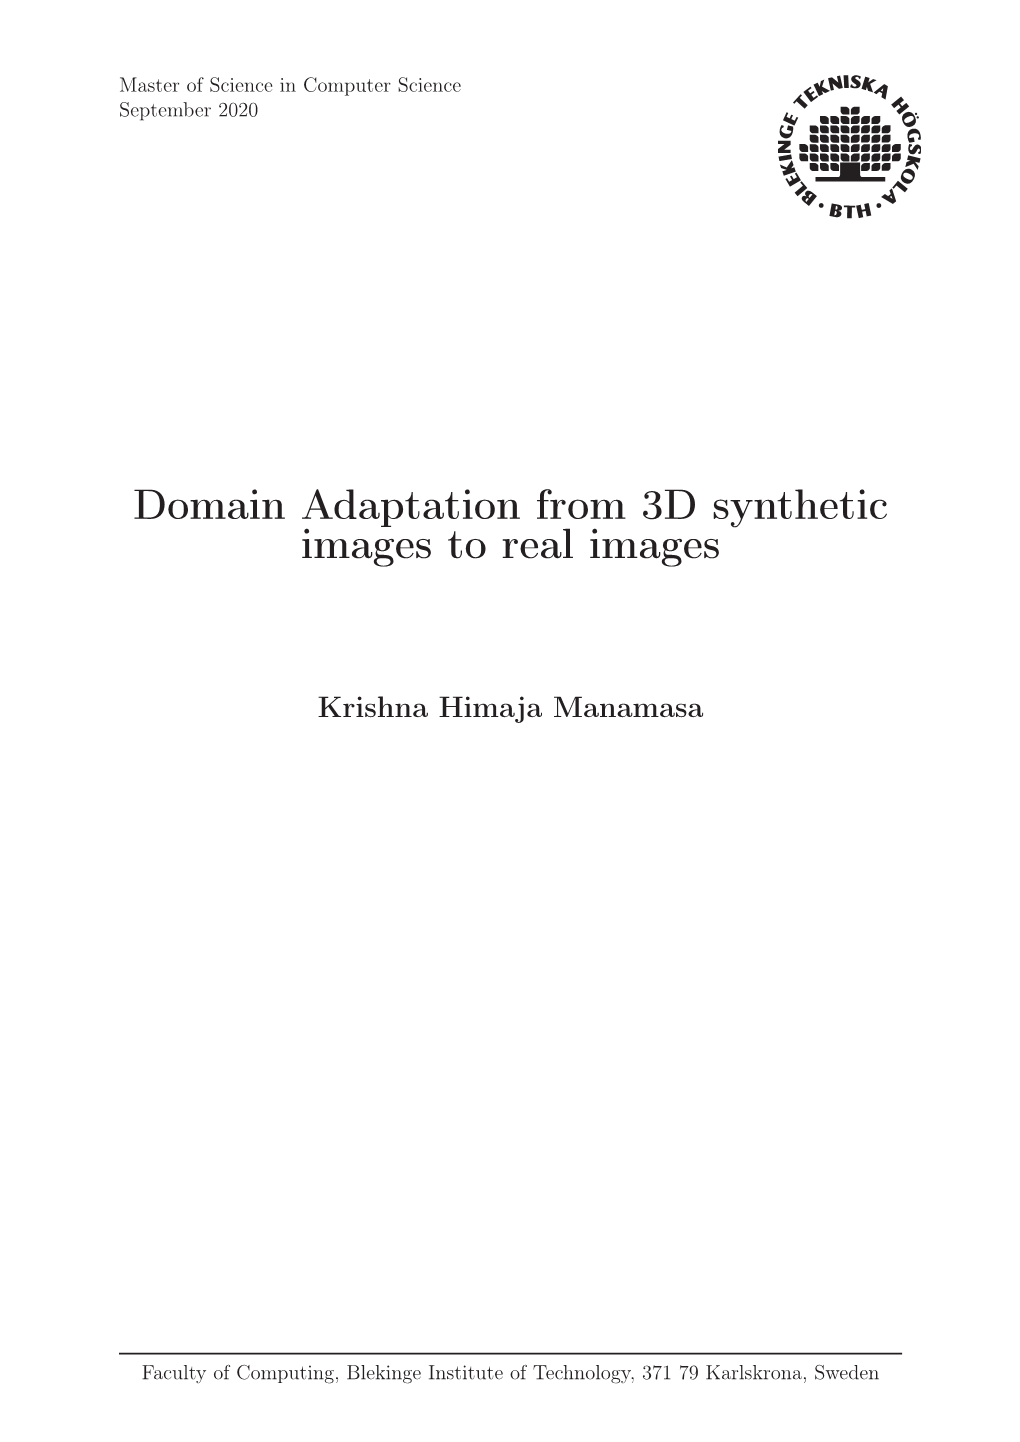 Domain Adaptation from 3D Synthetic Images to Real Images